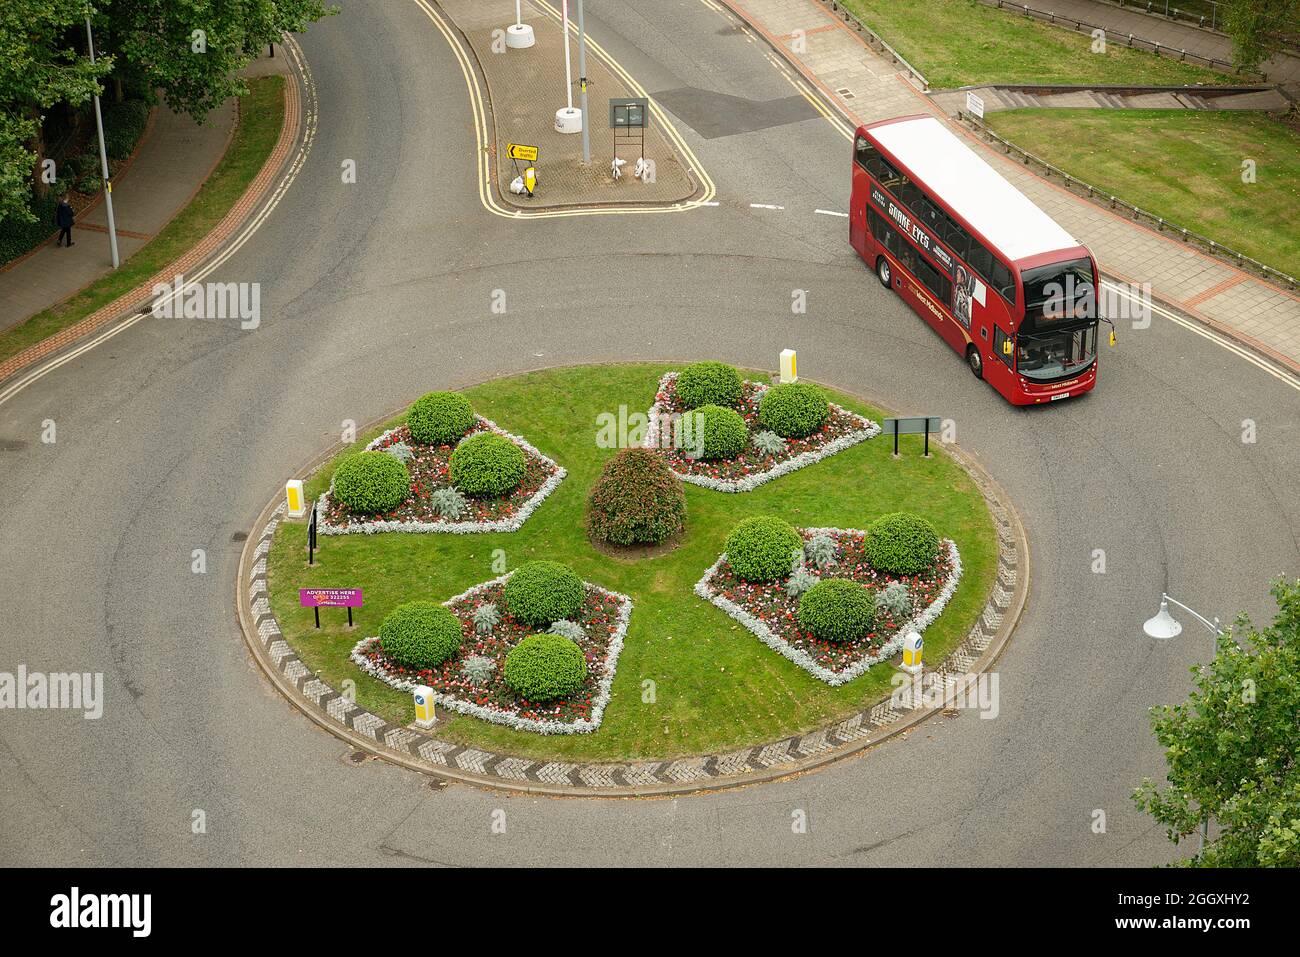 A roundabout or traffic circle. Attractively planted as a nice feature. Stock Photo